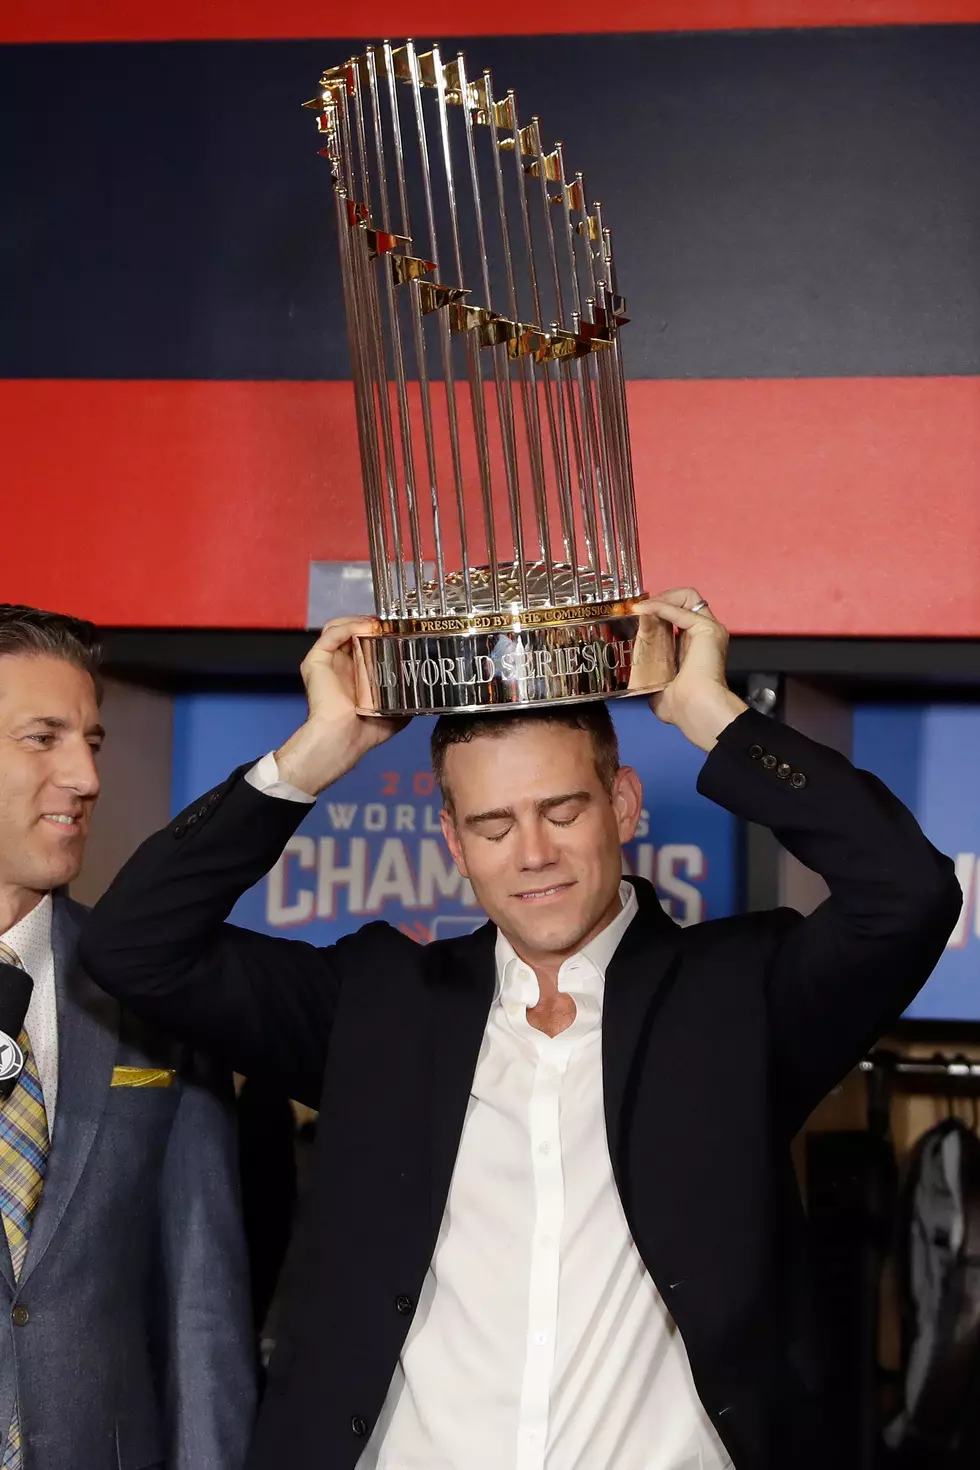 Indy stop confirmed for Cubs World Series trophy tour